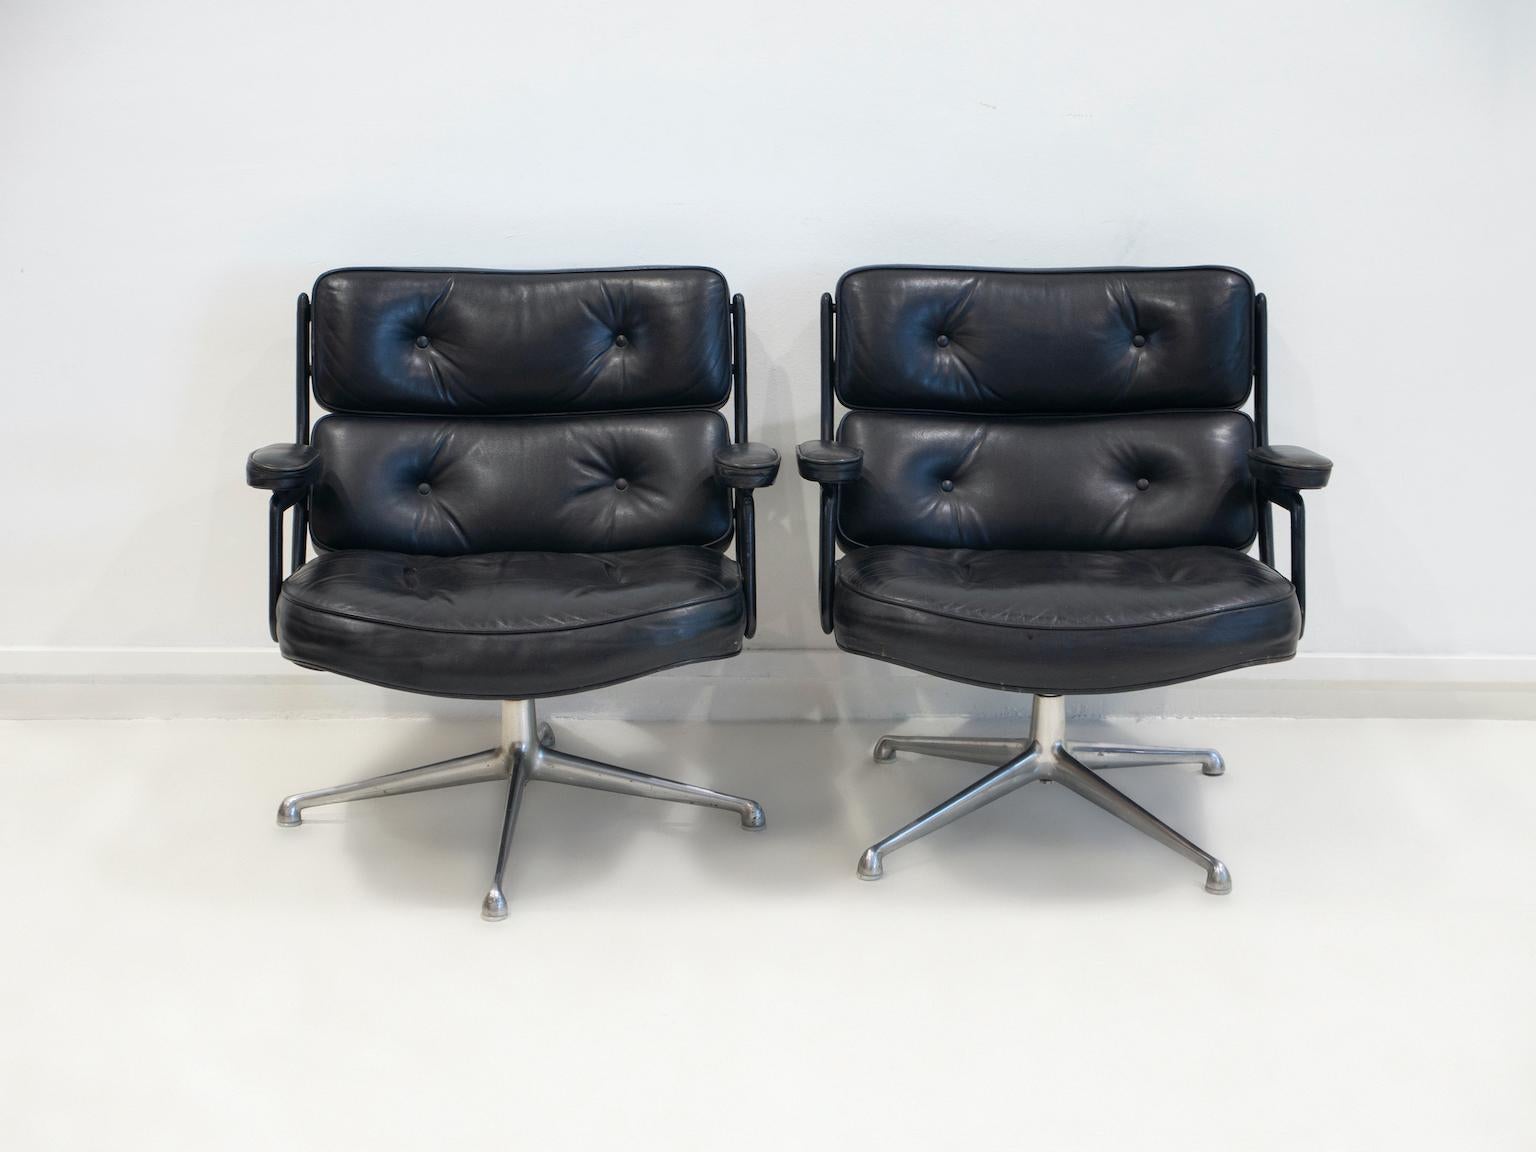 Pair of black leather upholstered swivel armchairs, model ES 108, designed by Charles & Ray Eames, manufactured by Vitra. 
The Lobby chair was designed in 1960 for the reception areas of the Time Life building in New York. 
Polished aluminum frame,